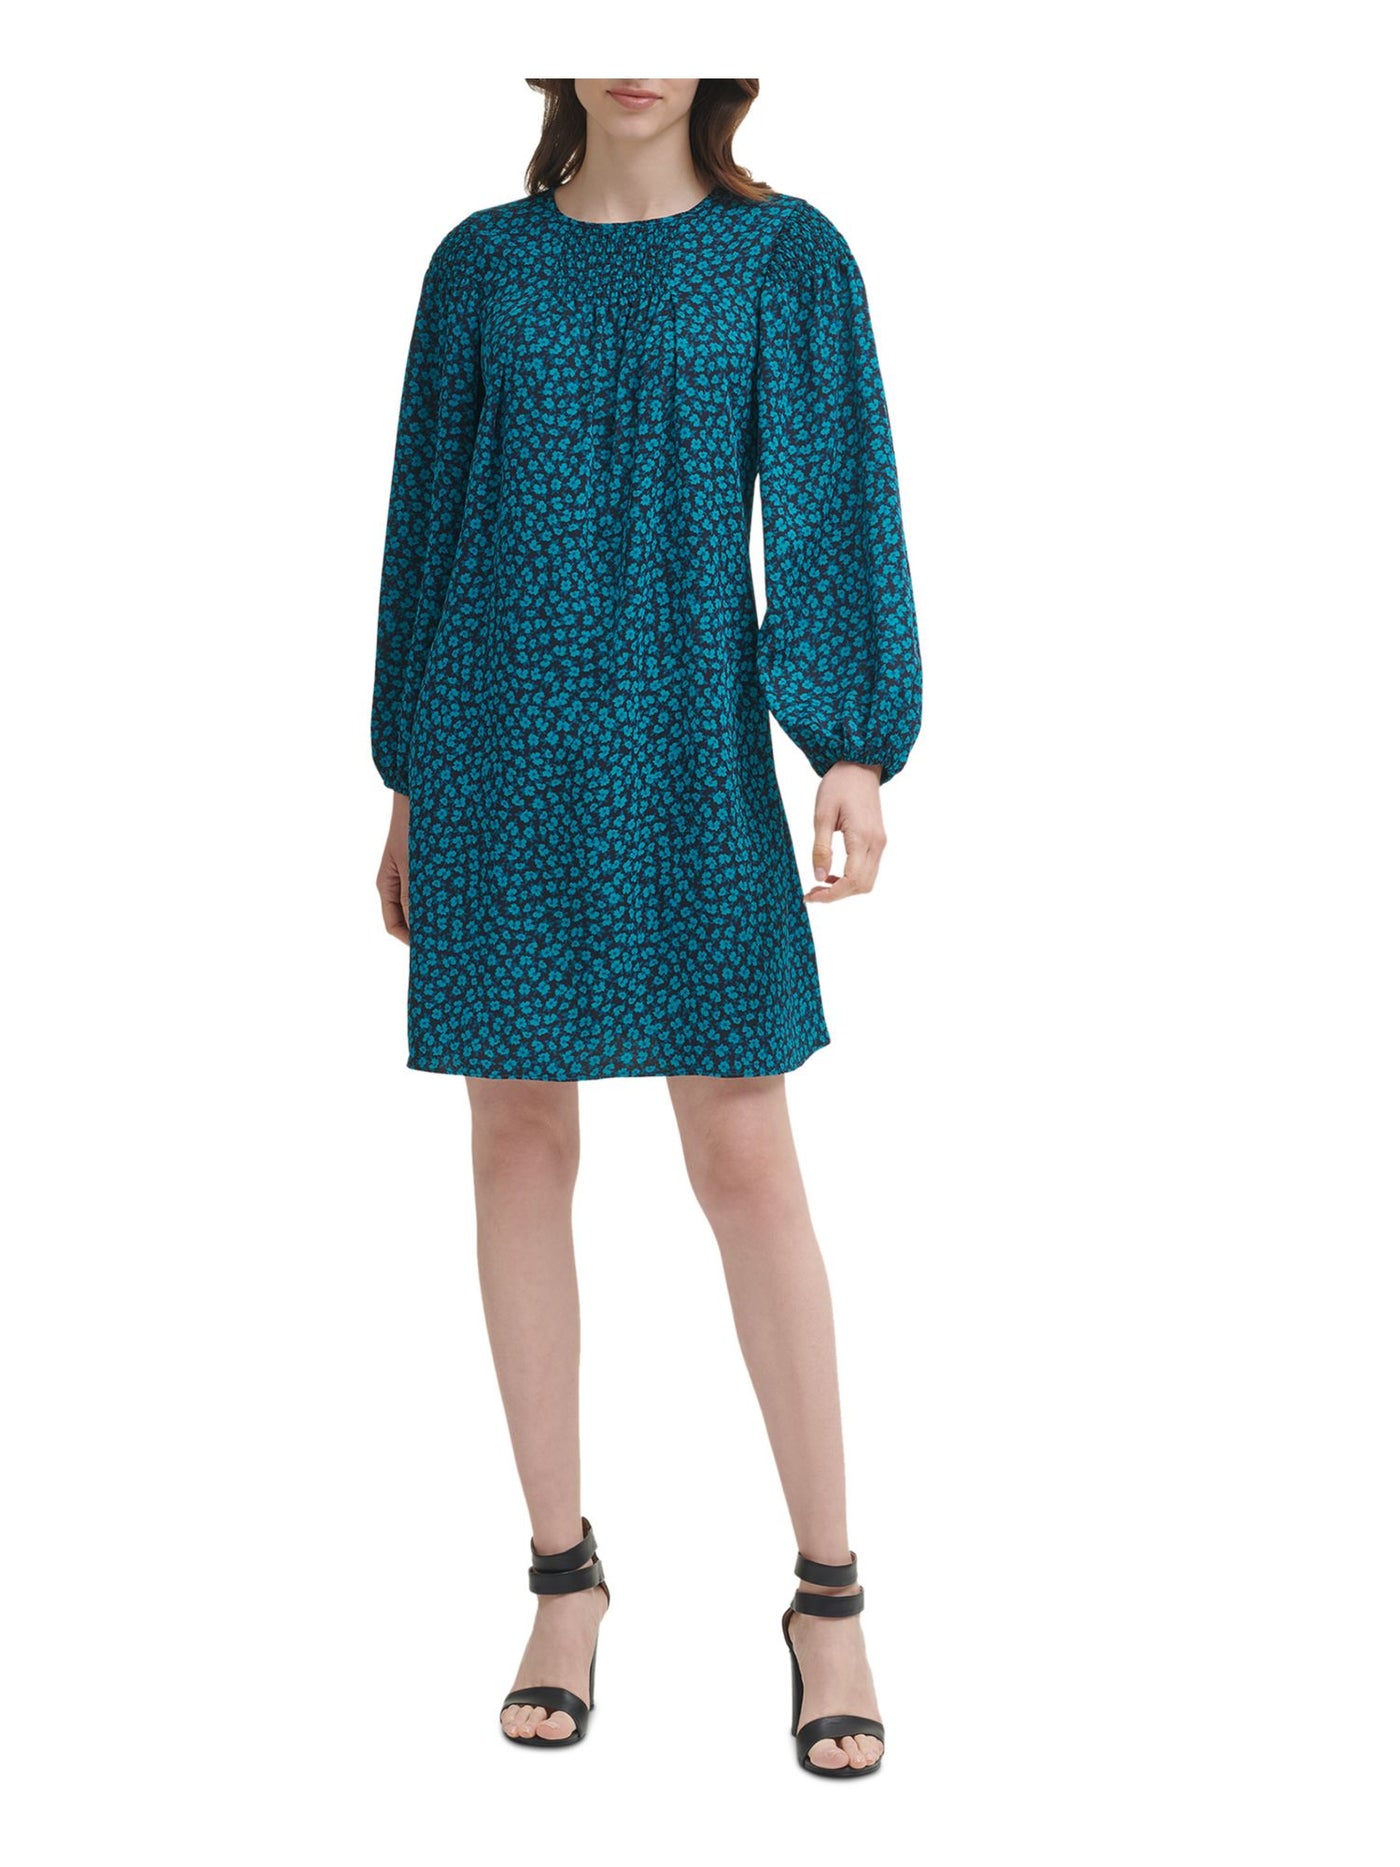 DKNY Womens Green Smocked Floral Long Sleeve Round Neck Short Evening Shift Dress 10